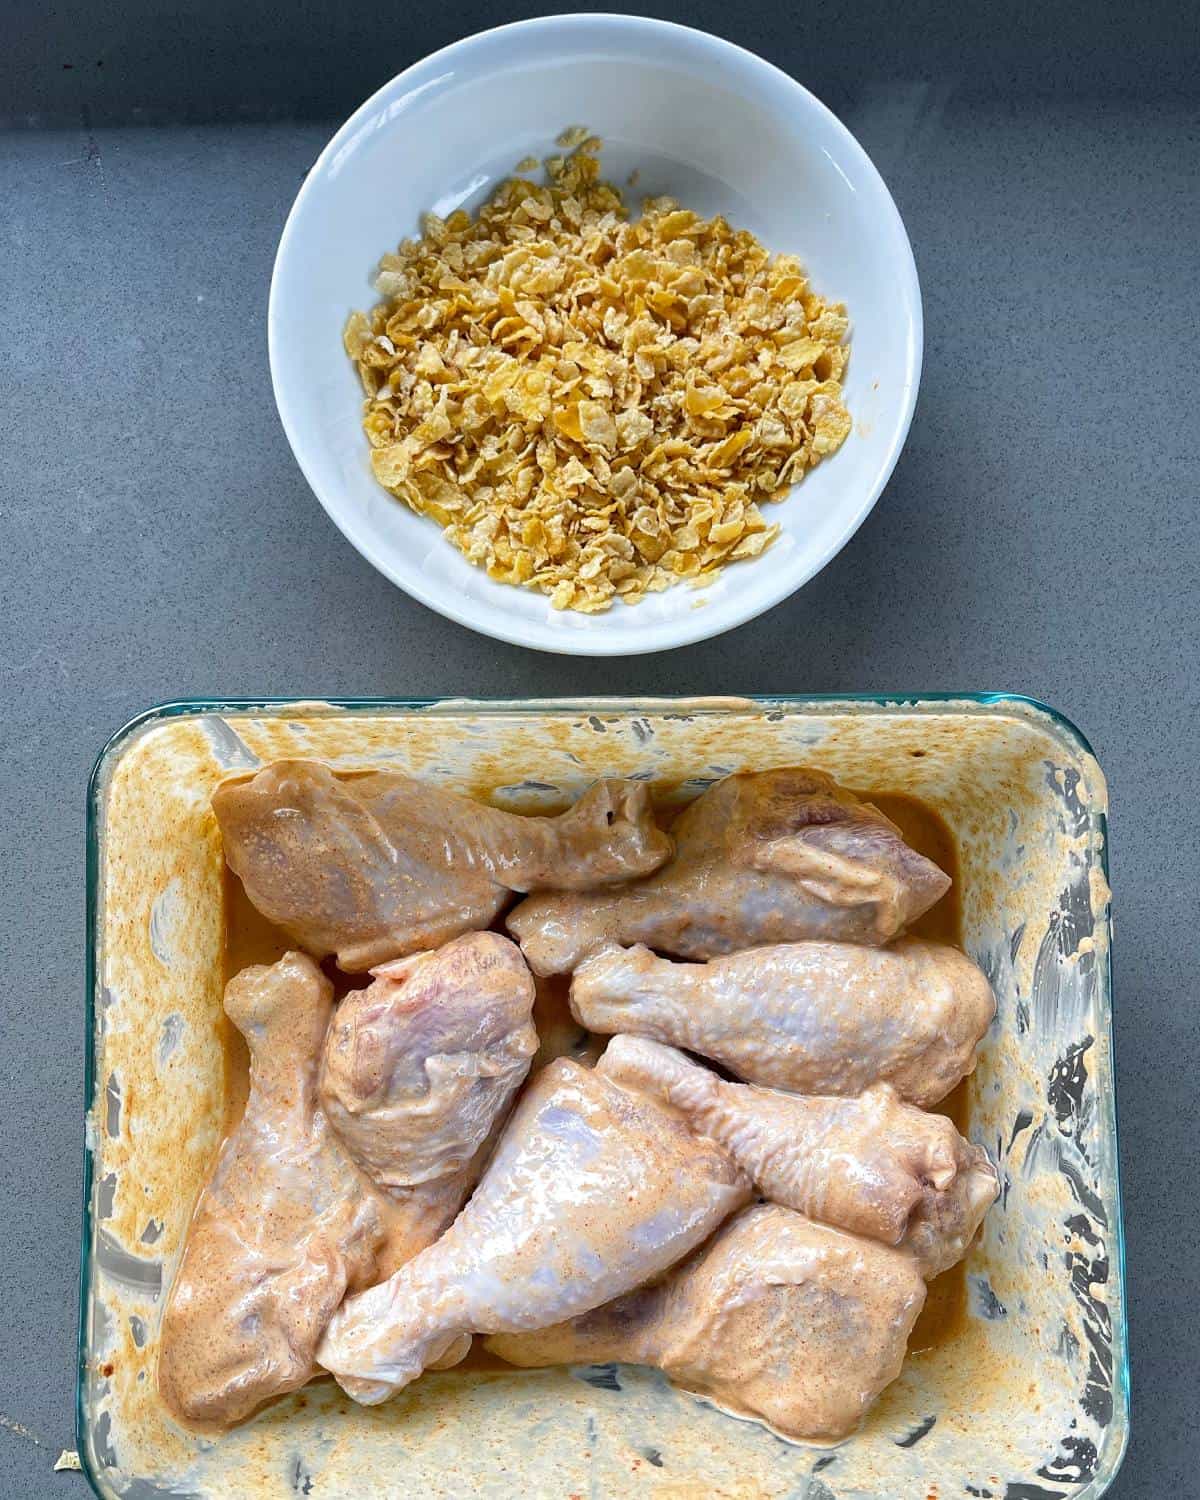 A bowl of cornflakes and a container of marinated chicken on a grey bench.